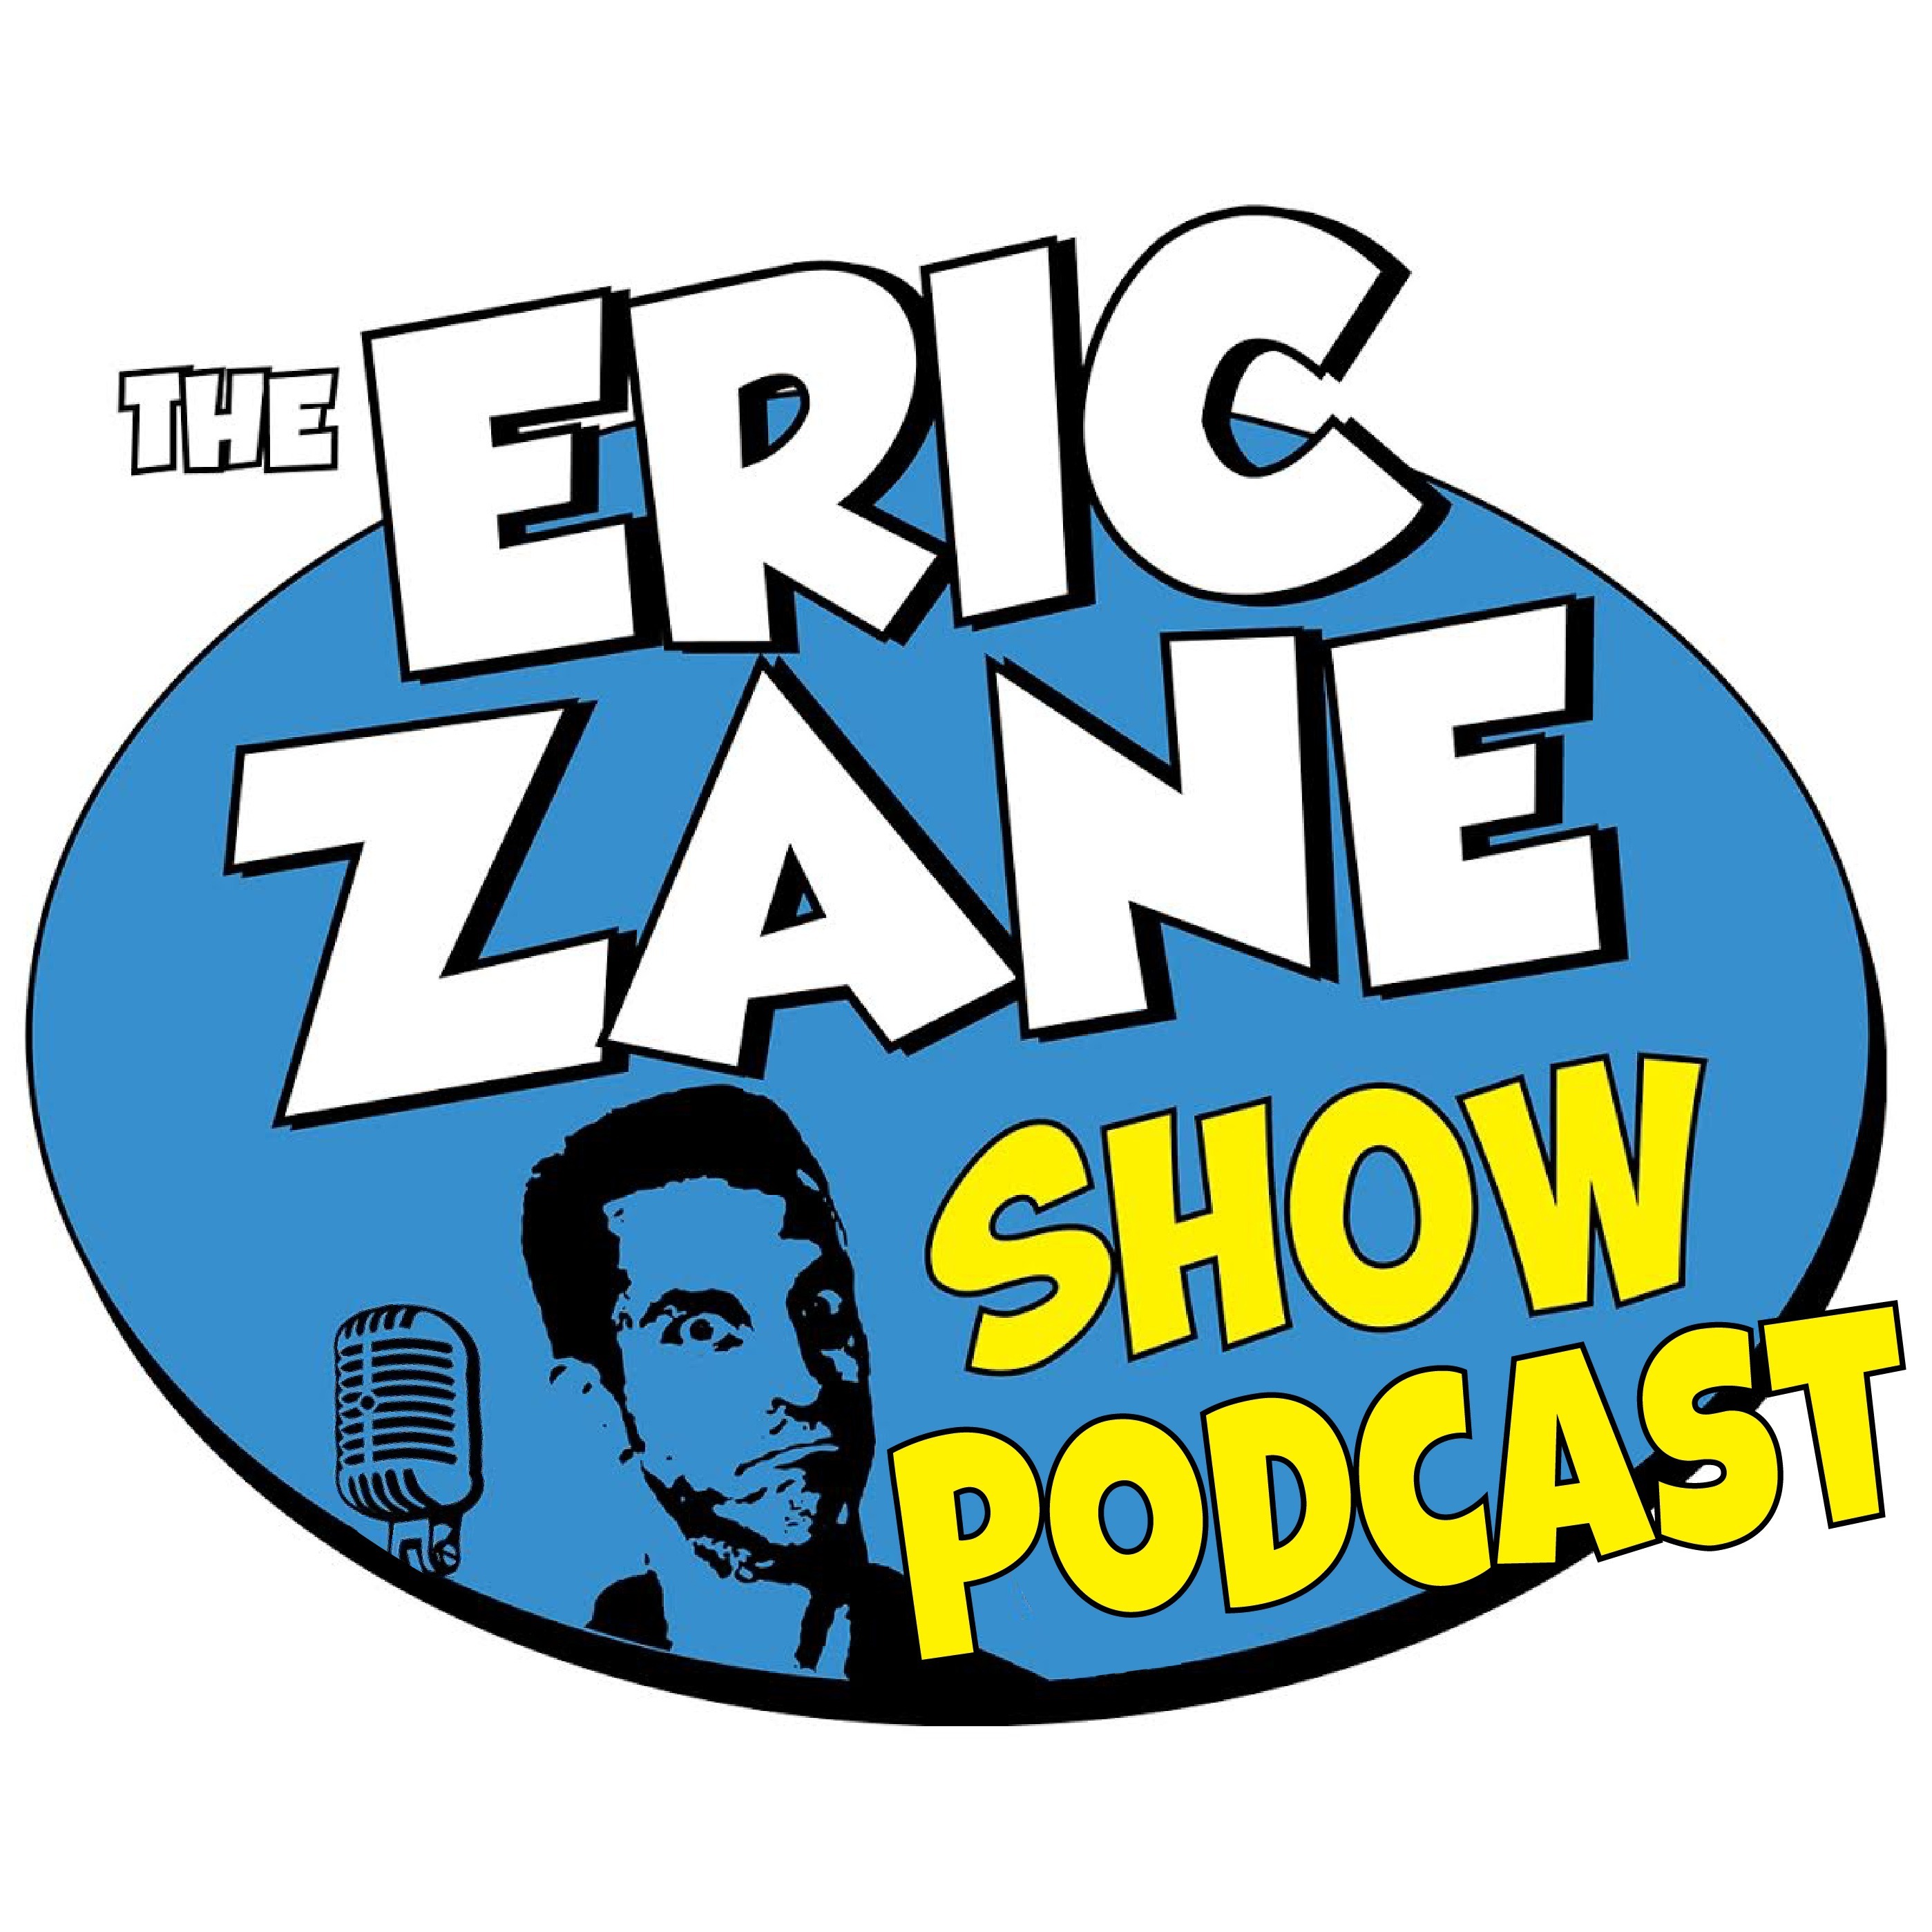 Eric Zane Show Podcast 934 - An actual live show dog fight and Kyrie Irving insanity